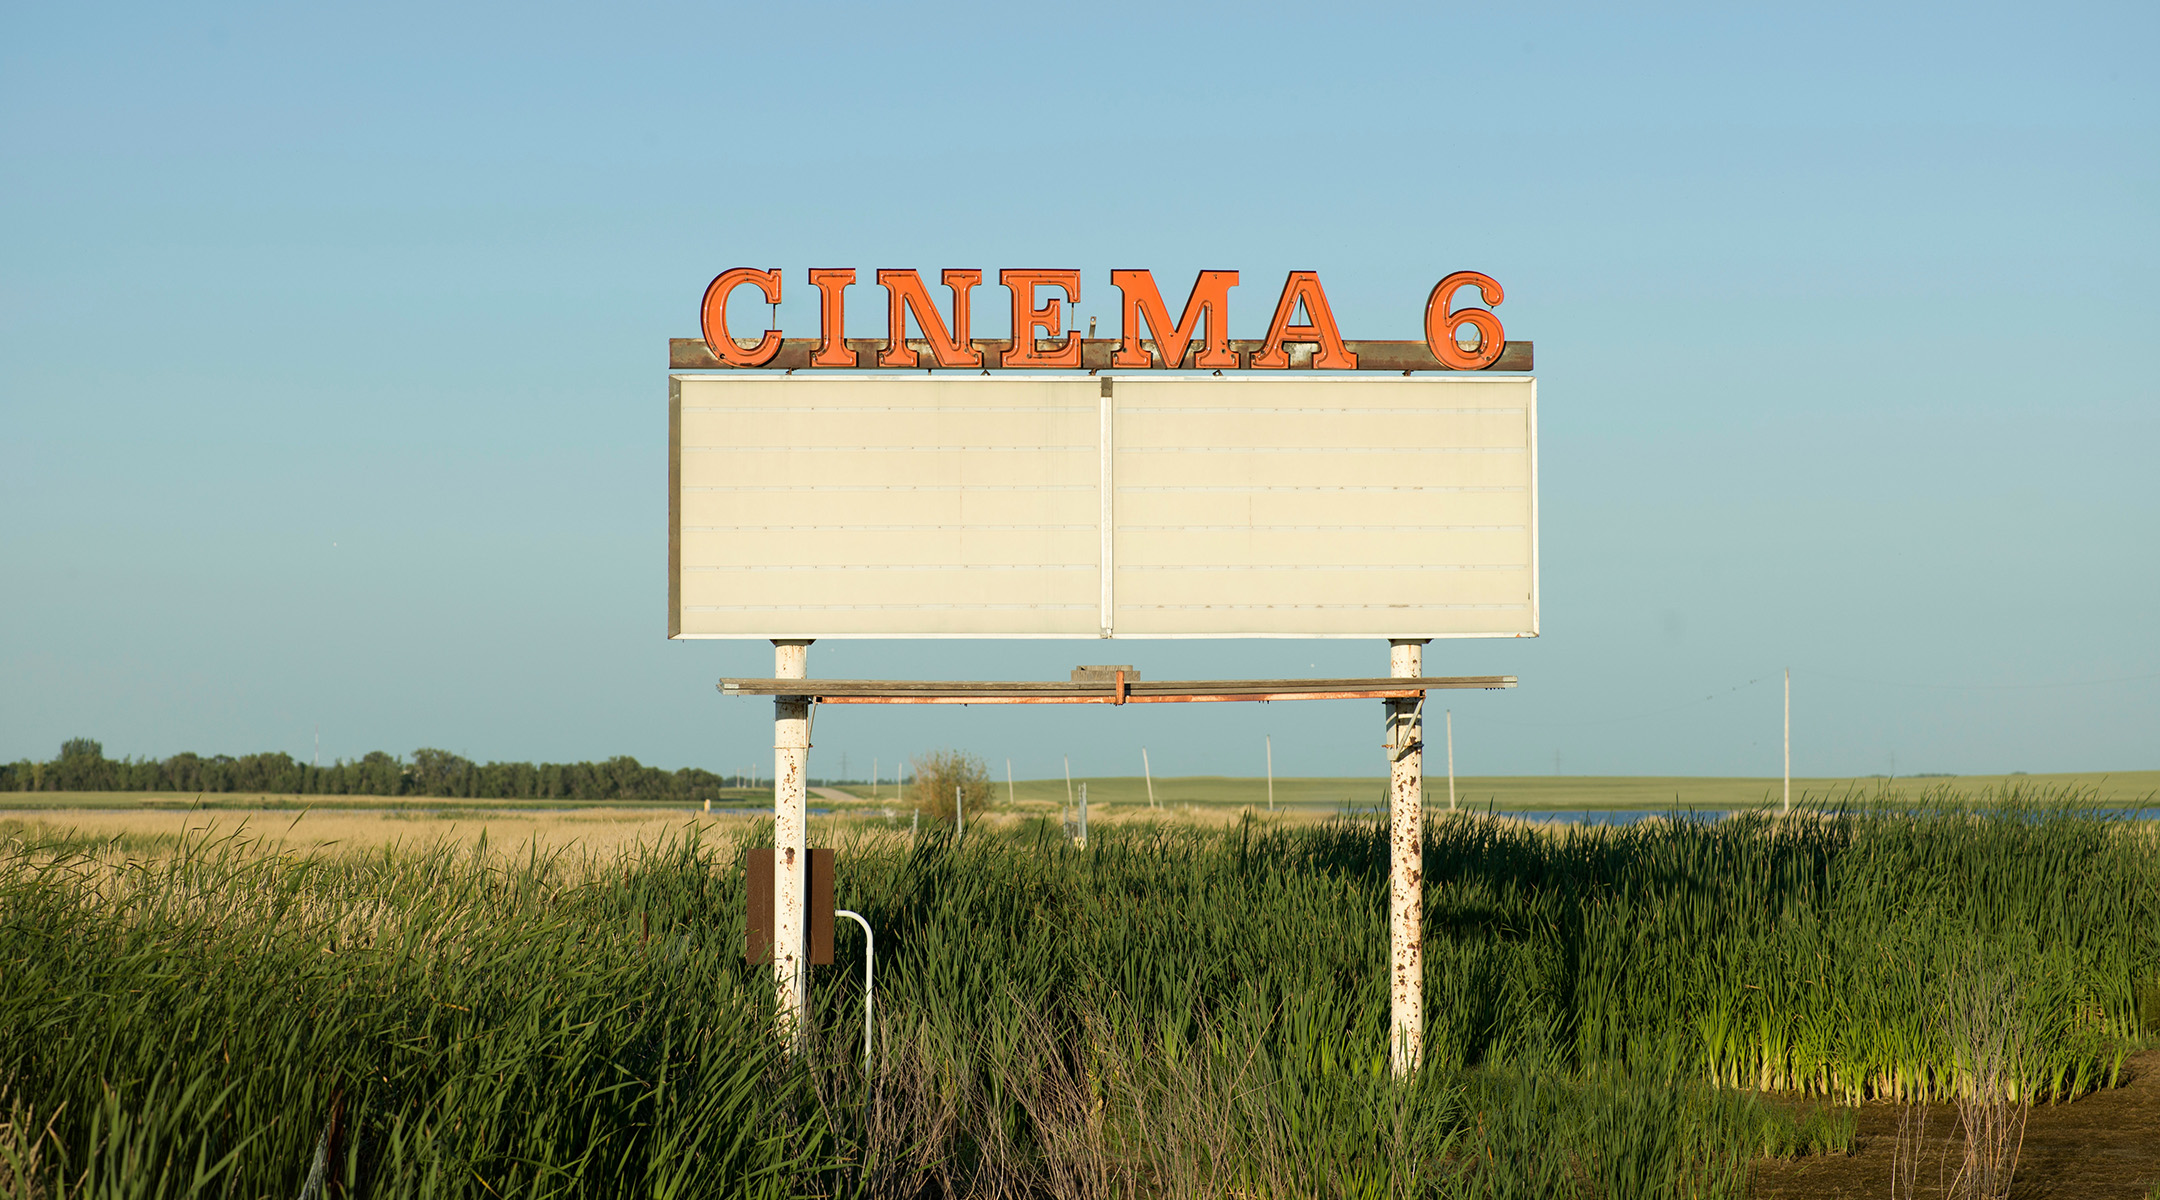 An empty movie theater marquee sign with Cinema 6 above it standing in an empty field